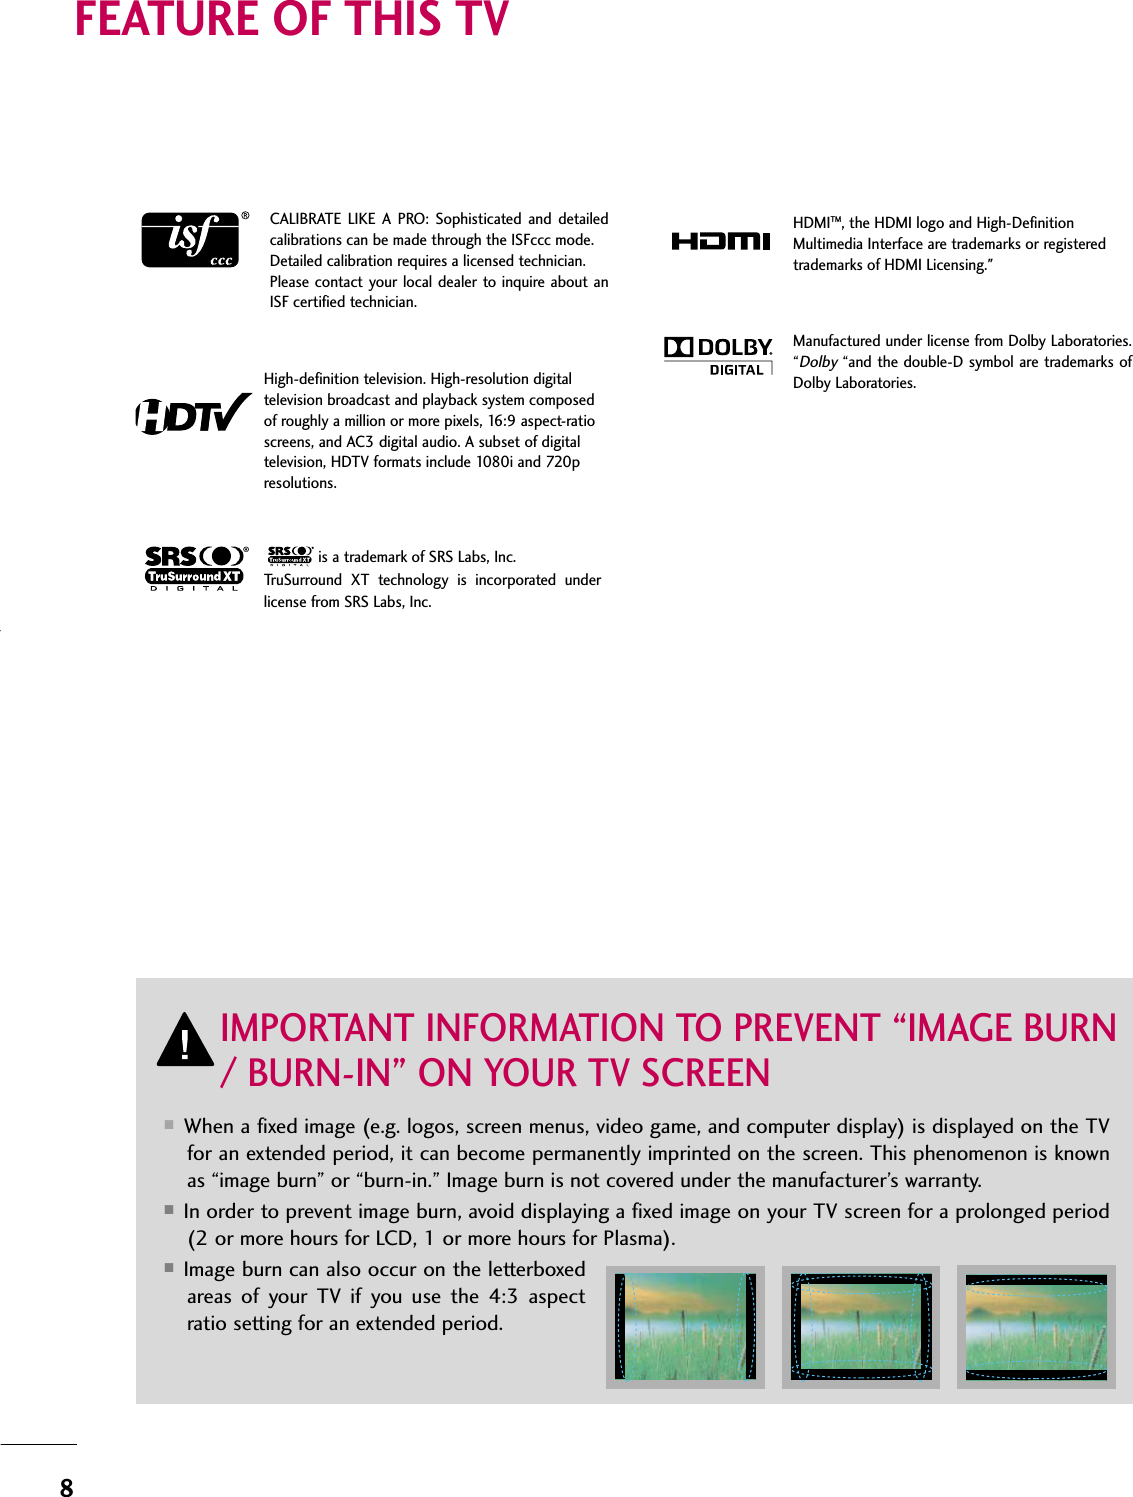 8FEATURE OF THIS TV■When a fixed image (e.g. logos, screen menus, video game, and computer display) is displayed on the TVfor an extended period, it can become permanently imprinted on the screen. This phenomenon is knownas “image burn” or “burn-in.” Image burn is not covered under the manufacturer’s warranty. ■In order to prevent image burn, avoid displaying a fixed image on your TV screen for a prolonged period(2 or more hours for LCD, 1 or more hours for Plasma). ■Image burn can also occur on the letterboxedareas of your TV if you use the 4:3 aspectratio setting for an extended period.IMPORTANT INFORMATION TO PREVENT “IMAGE BURN/ BURN-IN” ON YOUR TV SCREENHDMITM, the HDMI logo and High-DefinitionMultimedia Interface are trademarks or registeredtrademarks of HDMI Licensing.&quot;is a trademark of SRS Labs, Inc.TruSurround XT technology is incorporated underlicense from SRS Labs, Inc.Manufactured under license from Dolby Laboratories.“Dolby“and the double-D symbol are trademarks ofDolby Laboratories. CALIBRATE LIKE A PRO: Sophisticated and detailedcalibrations can be made through the ISFccc mode.Detailed calibration requires a licensed technician.Please contact your local dealer to inquire about anISF certified technician.High-definition television. High-resolution digitaltelevision broadcast and playback system composedof roughly a million or more pixels, 16:9 aspect-ratioscreens, and AC3 digital audio. A subset of digitaltelevision, HDTV formats include 1080i and 720presolutions.f